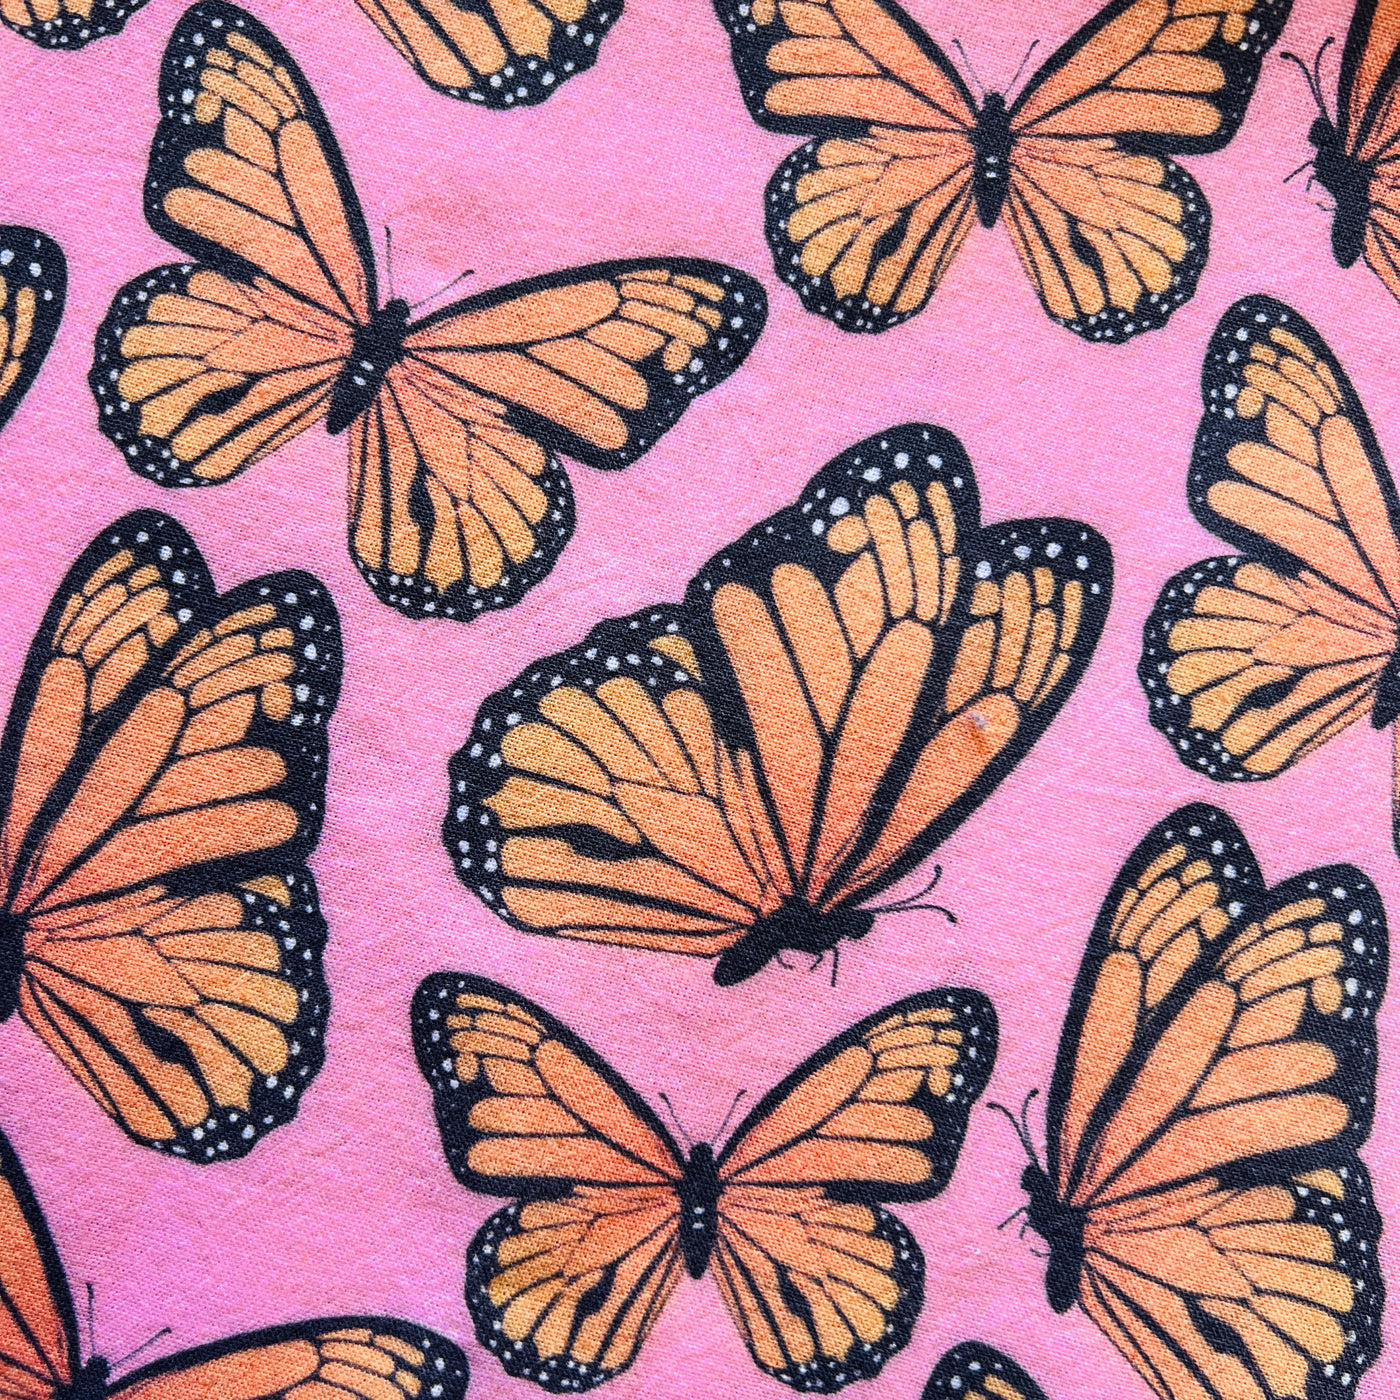 close up view of a pink towel with a monarch design